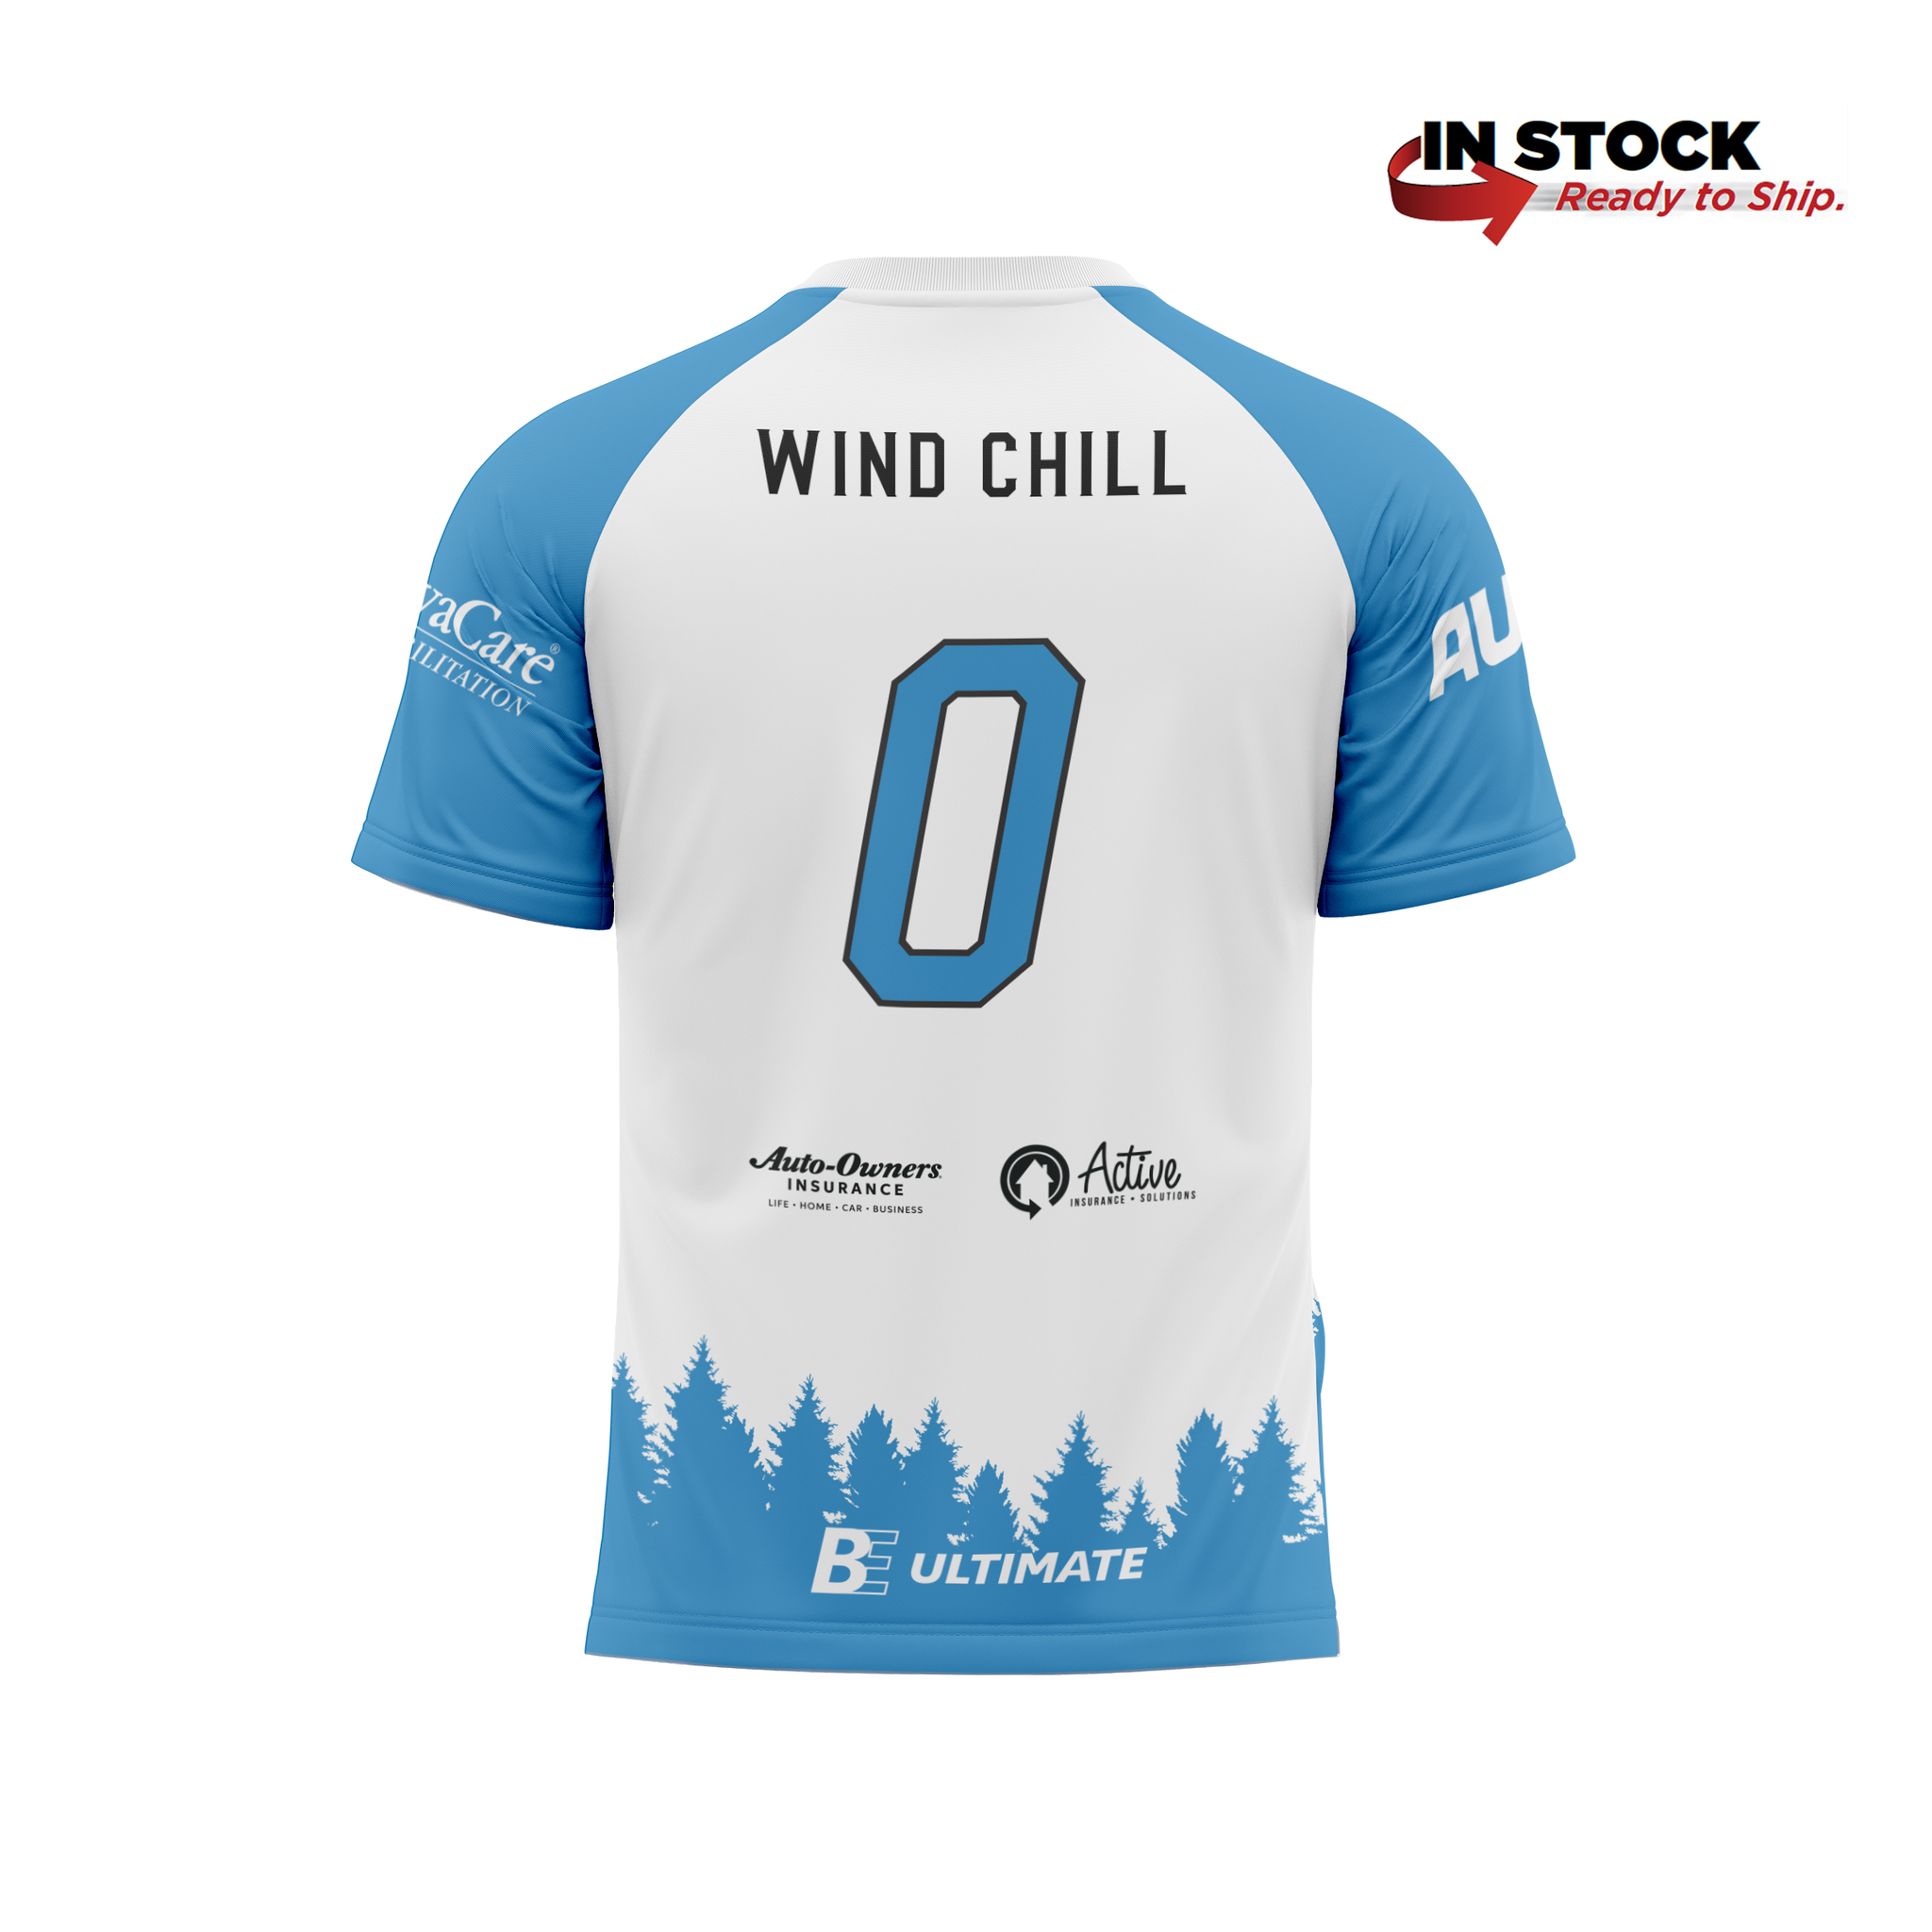 Wind Chill 2023 Away Replica Jersey - Wind Chill #0 - Ready to Ship